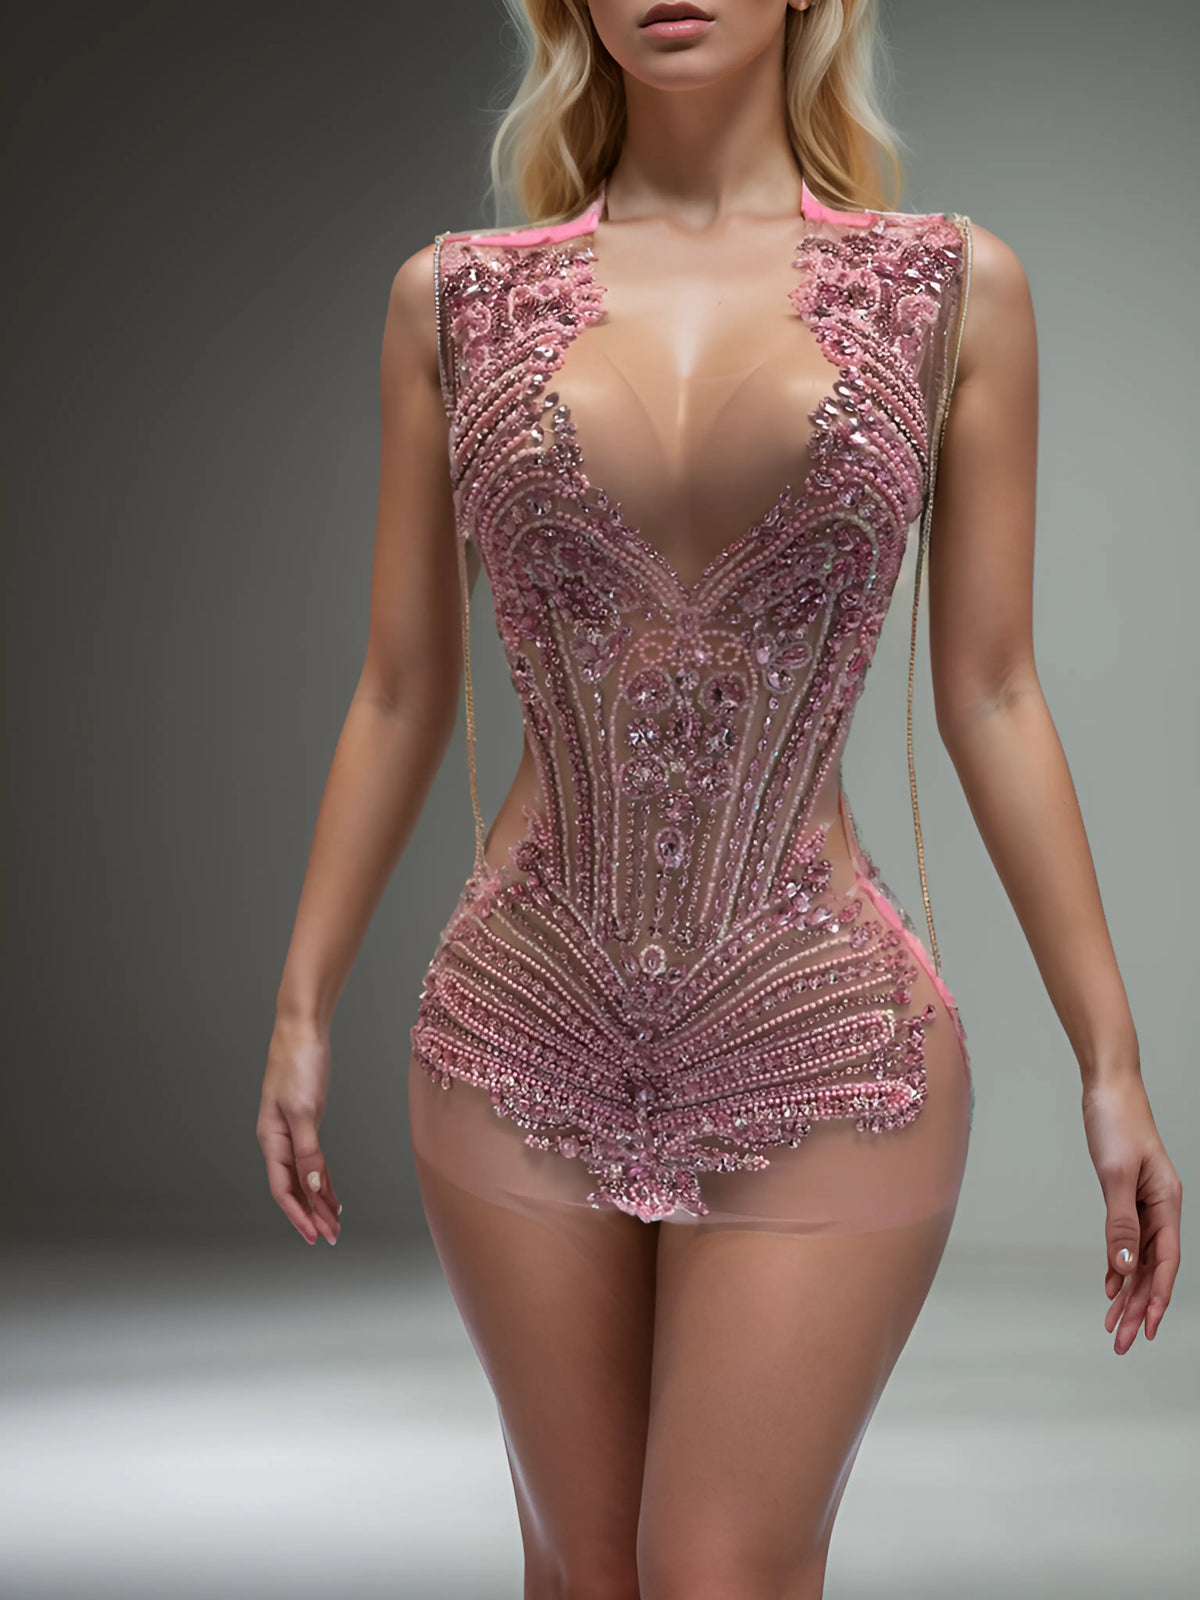 Sensual Splendor - Pink Crystals, Feathers in Sexy Sheer Cocktail Gowns